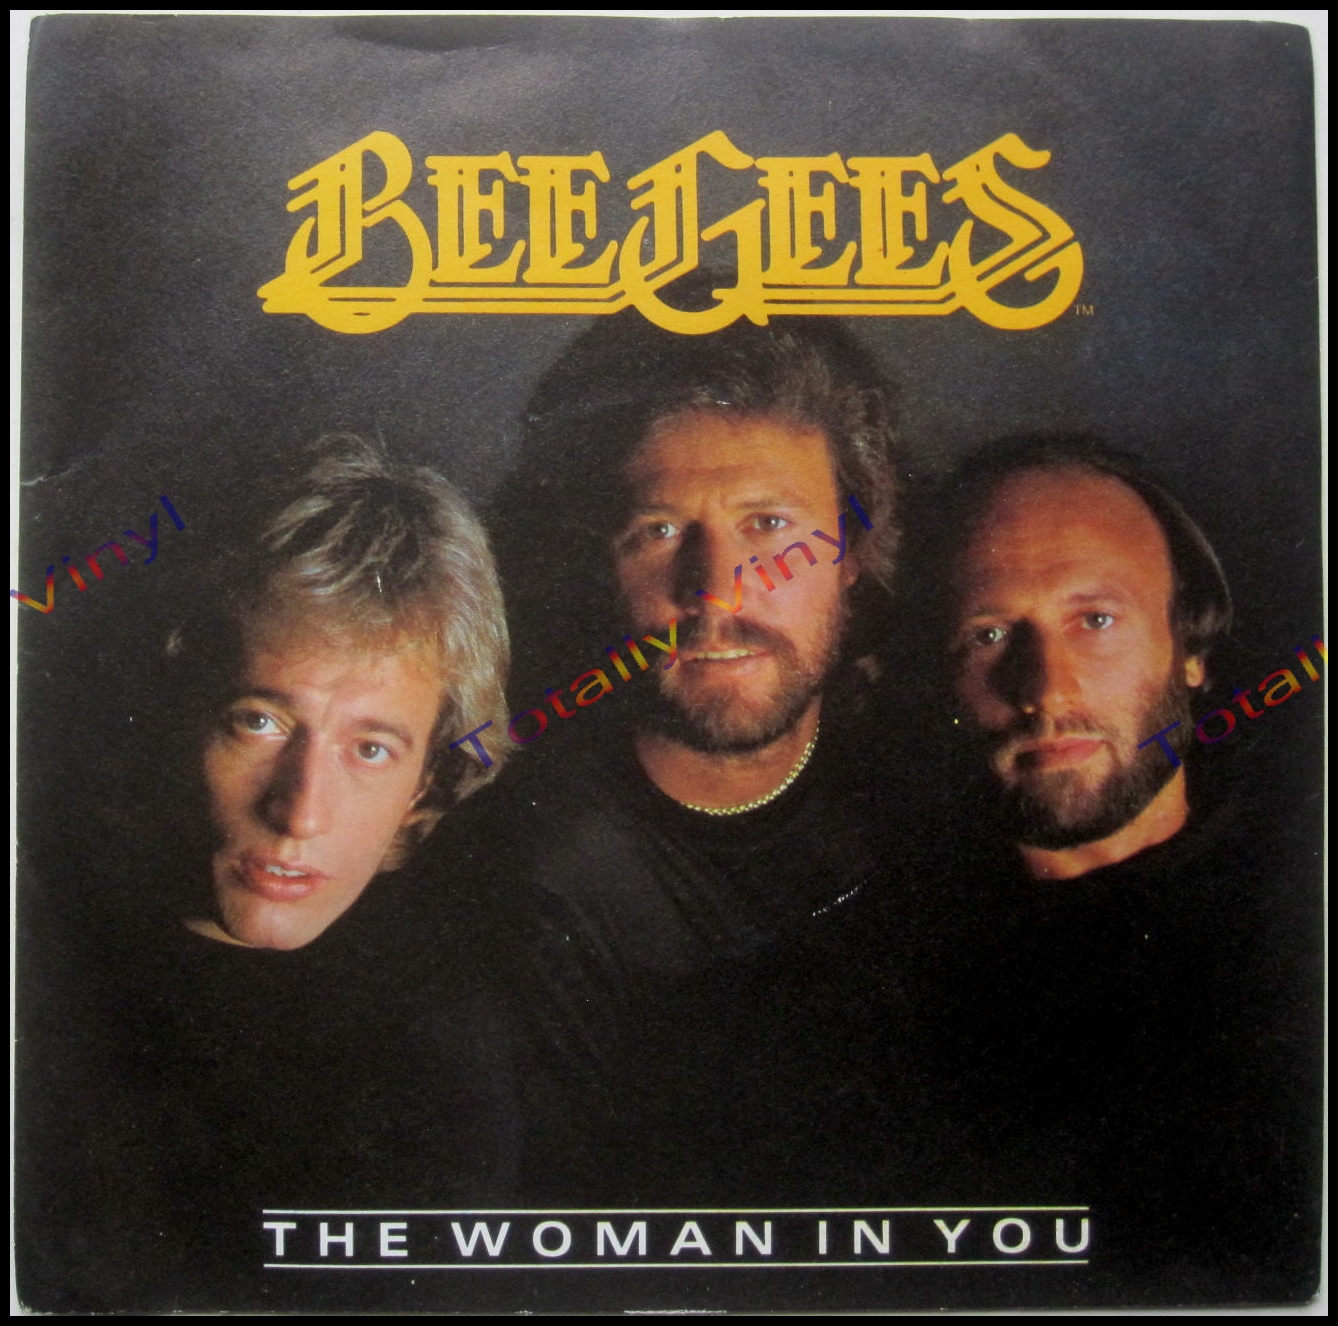 stayin alive by the bee gees